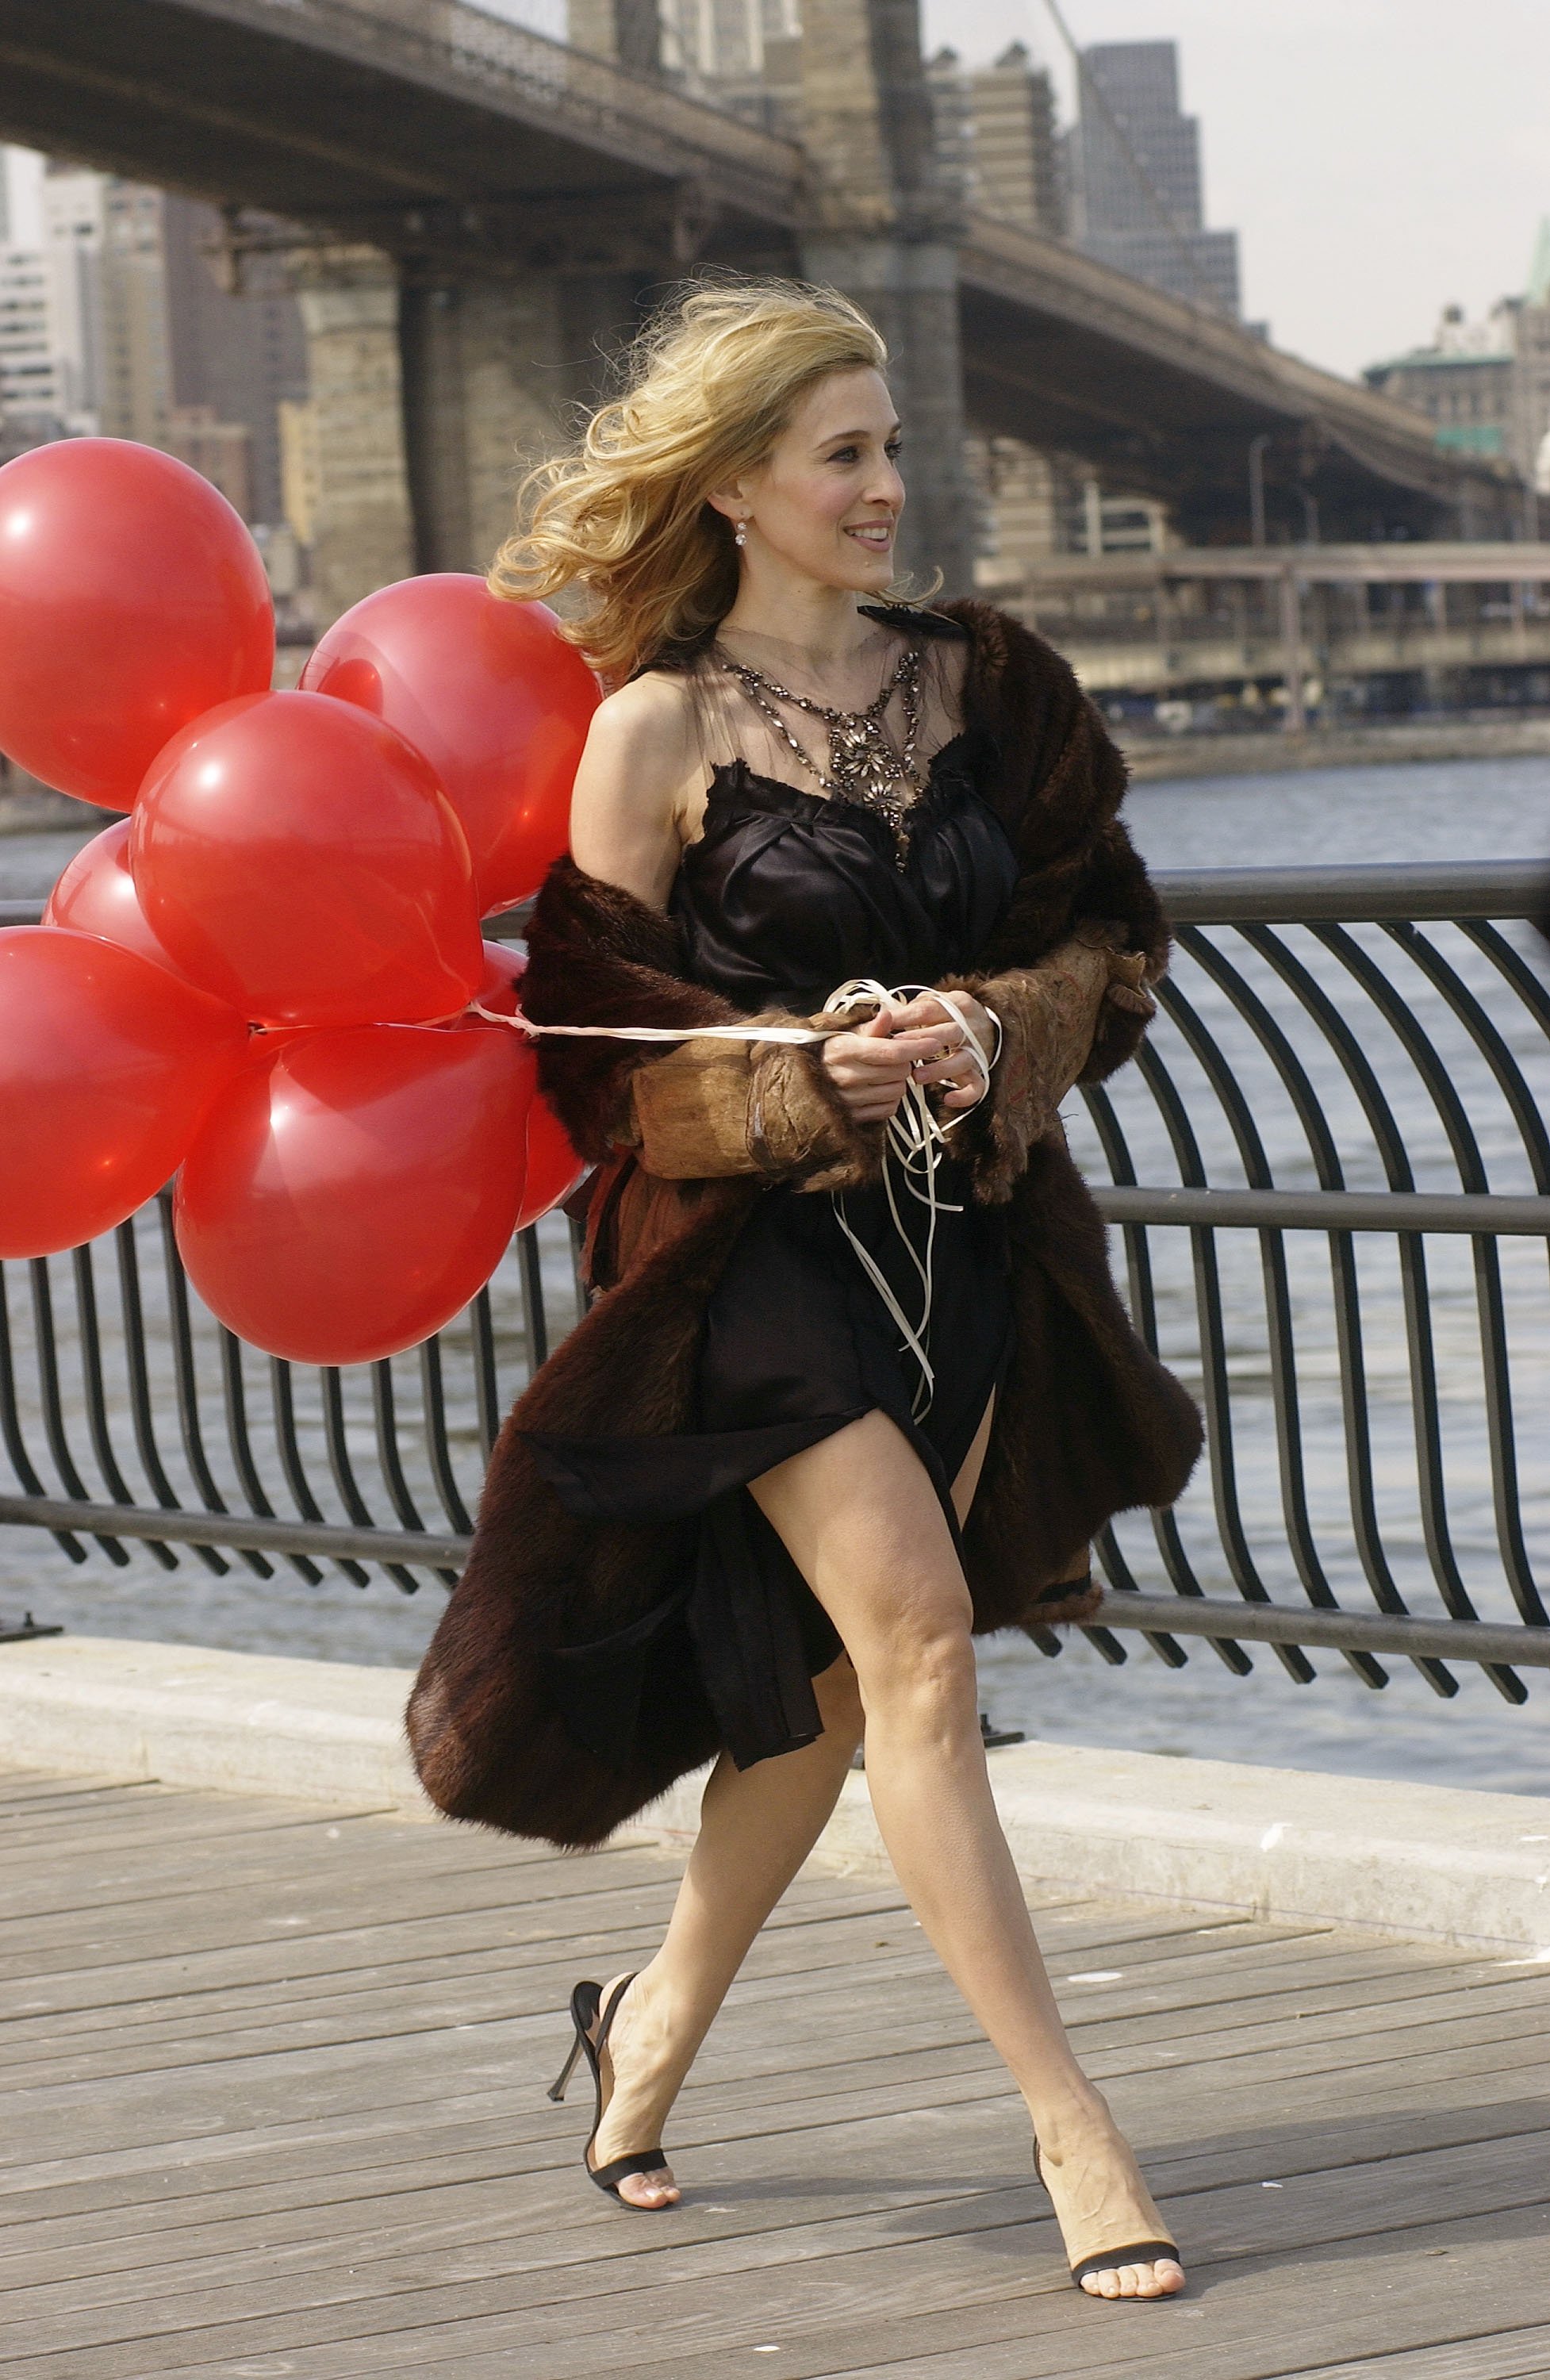 Sarah Jessica Parker as Carrie Bradshaw in 'Sex and the City'